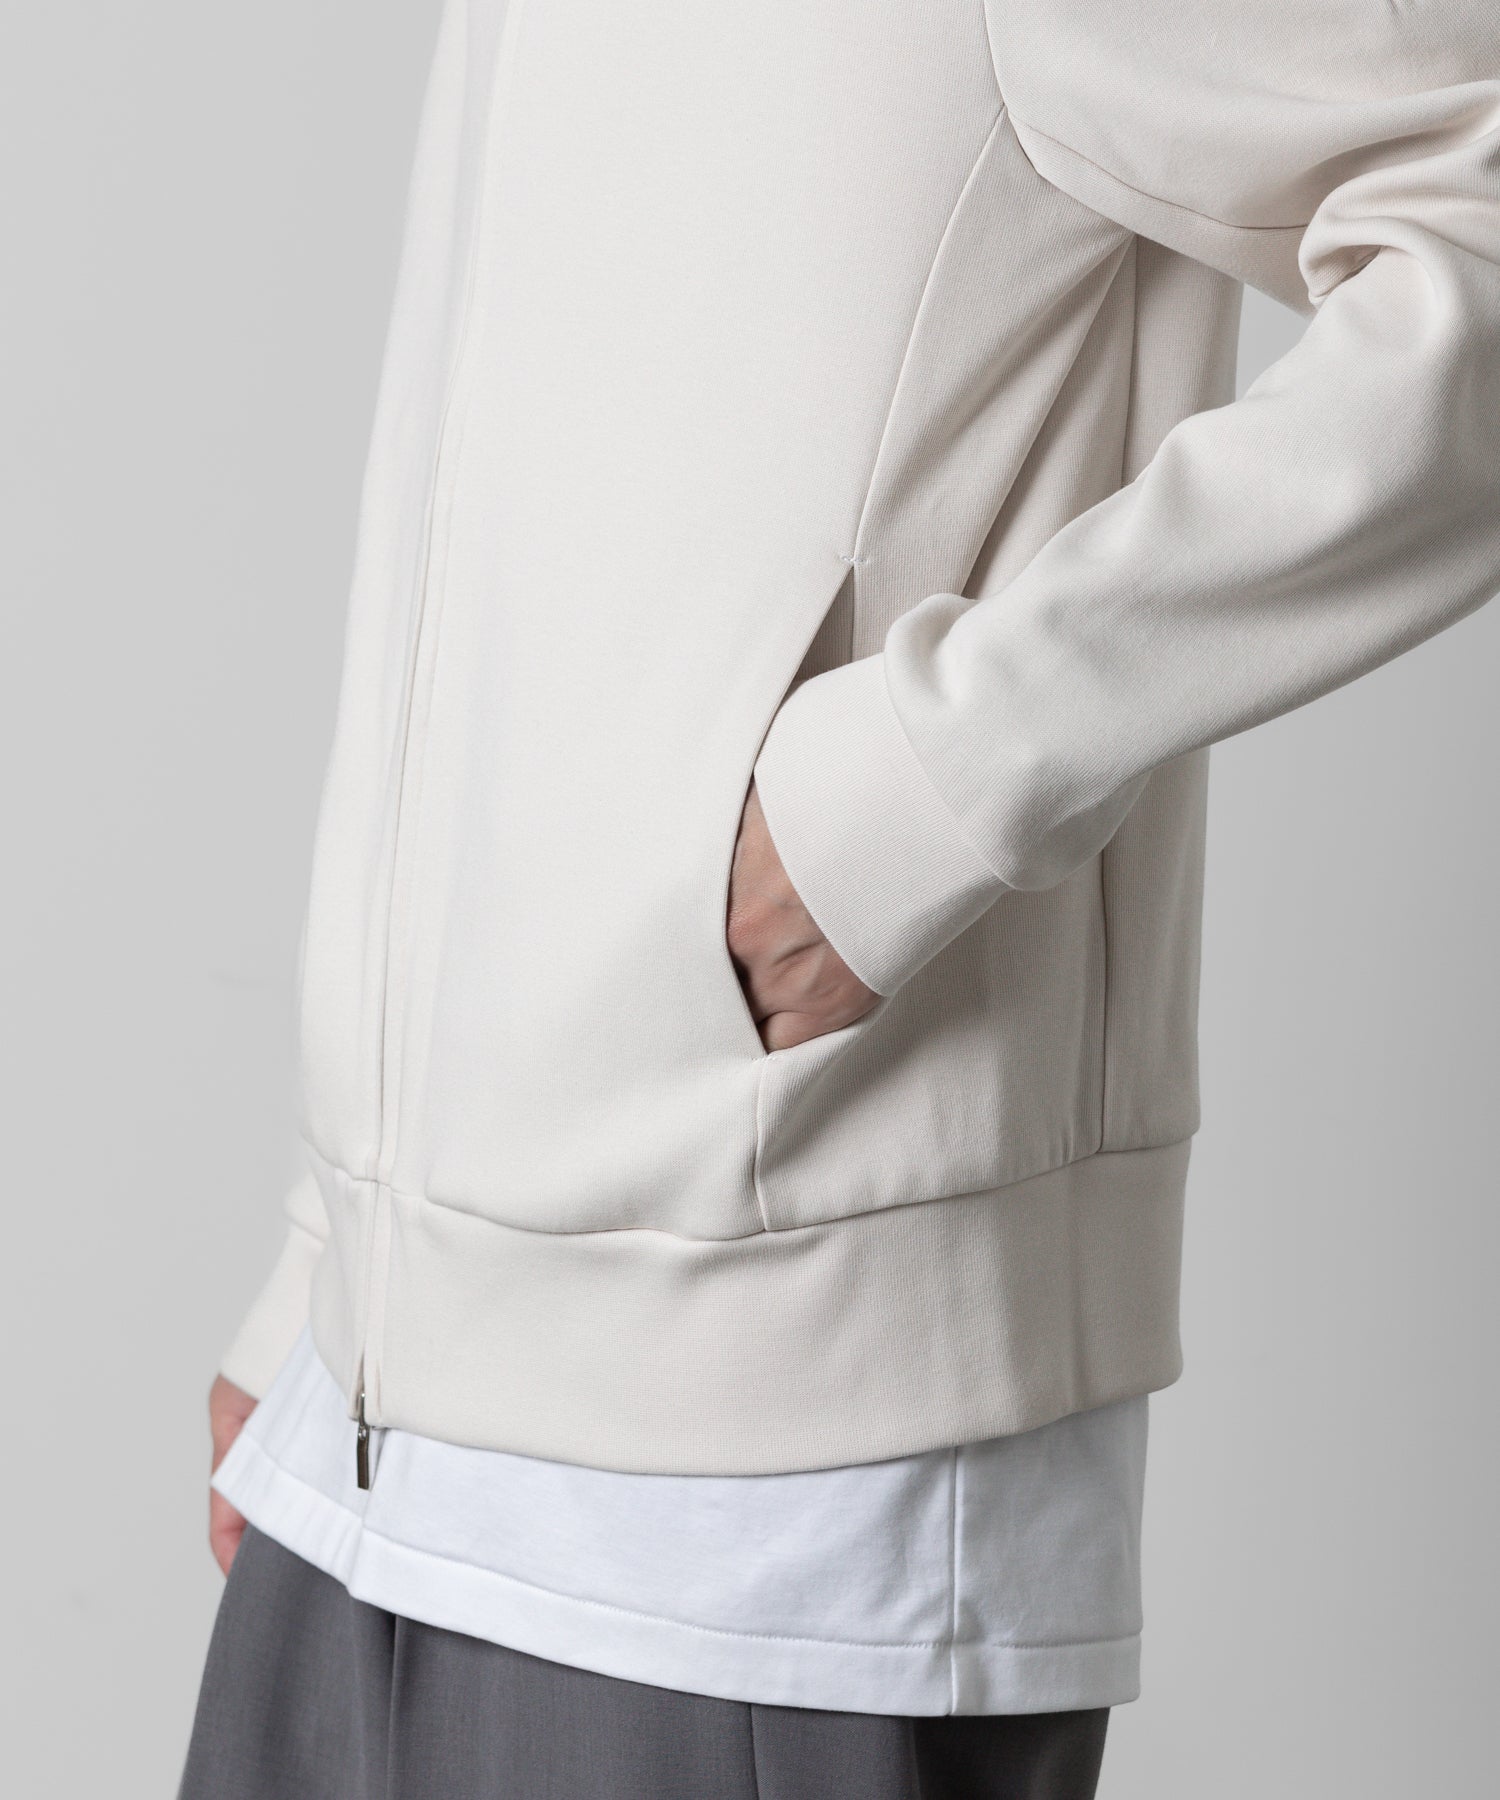 ATTACHMENT アタッチメント-LIMITED-のCO/PE DOUBLE FACE KNIT ZIP UP HOODIE - OFF WHITEの公式通販サイトsession福岡セレクトショップ